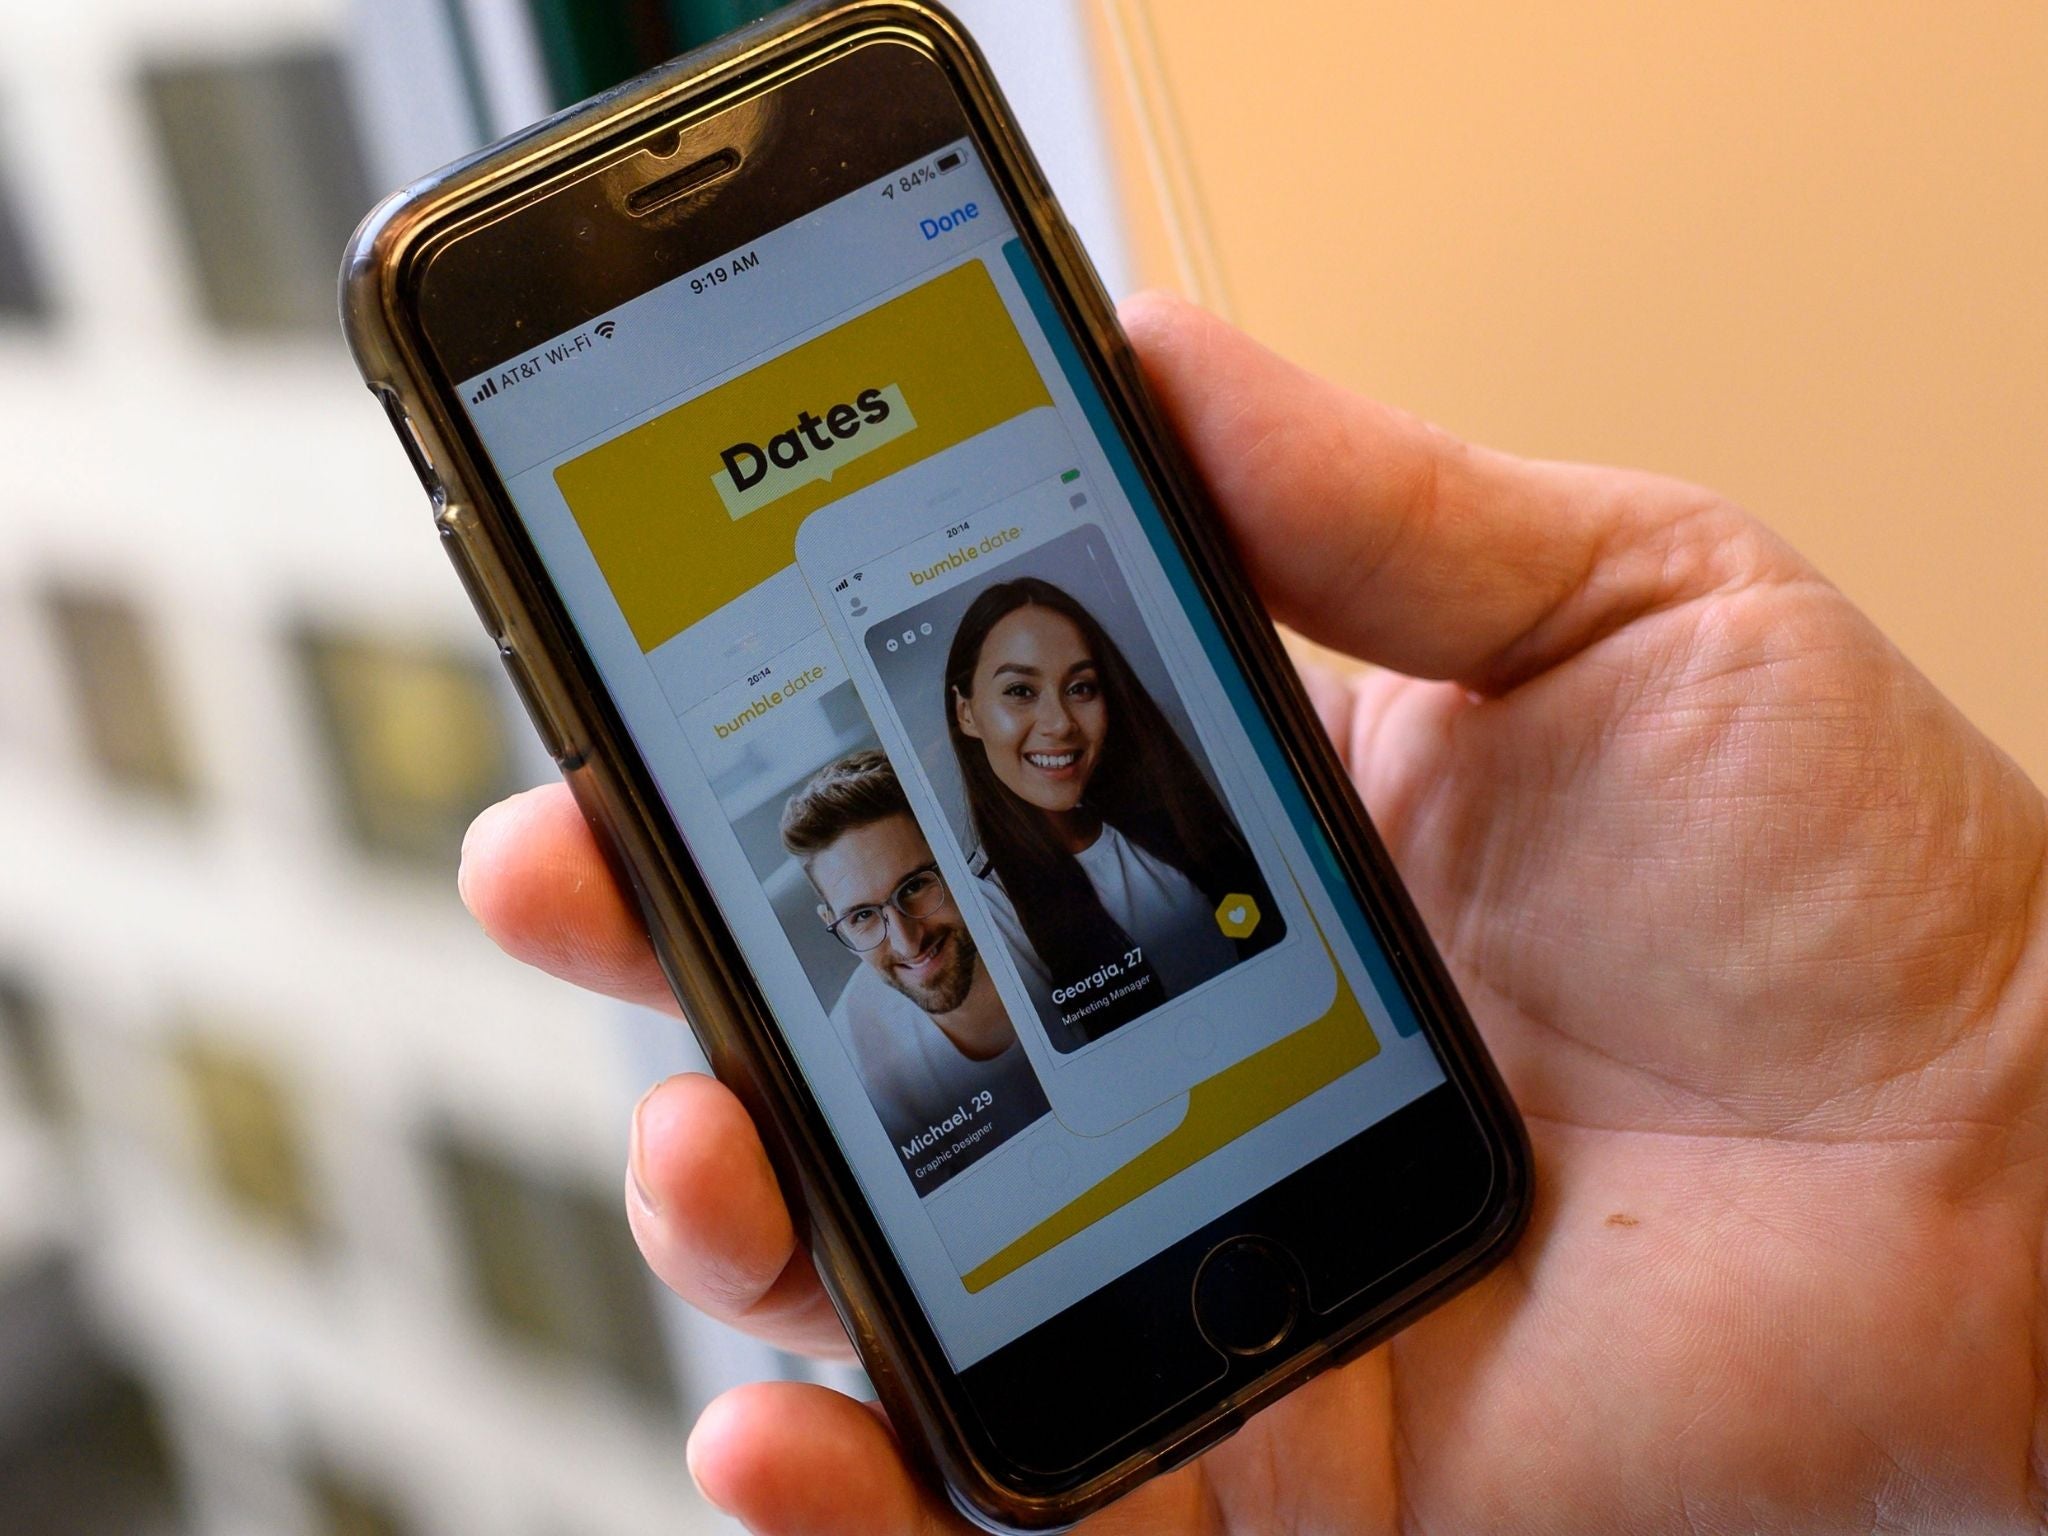 Shares in Bumble, which also owns the Badoo dating app, priced at $43 on Wednesday